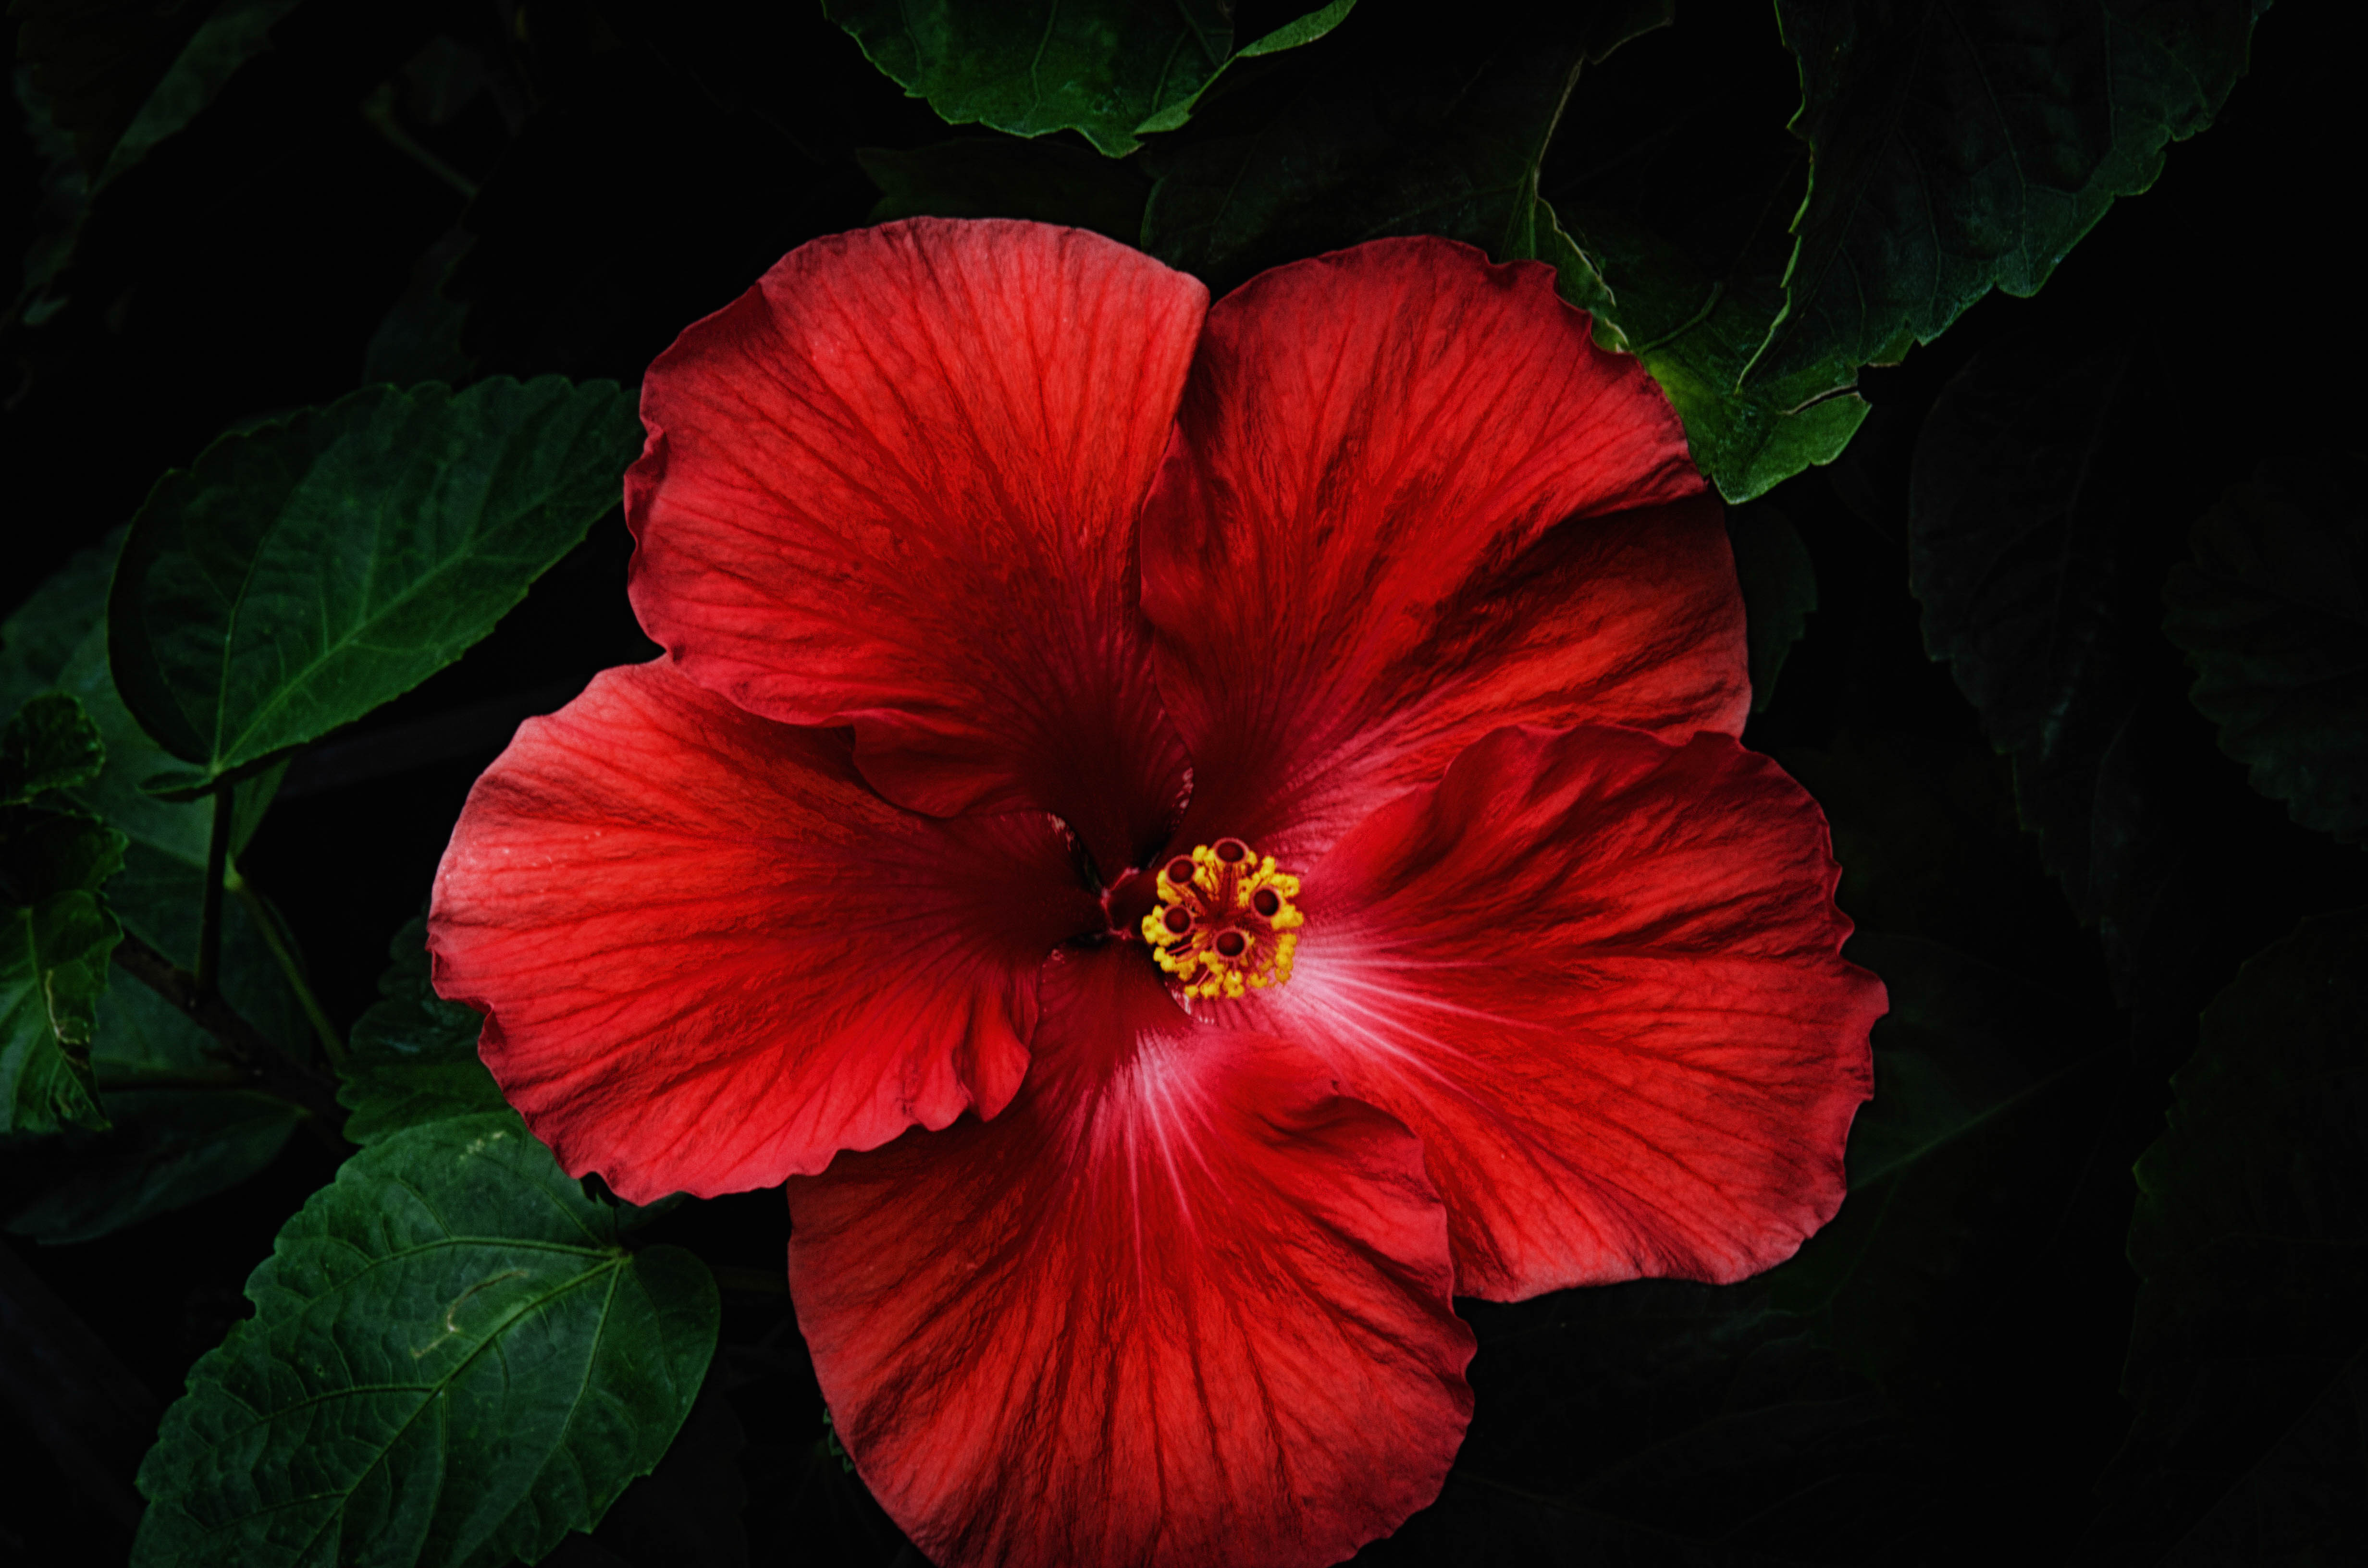 Close Up Earth Flower Hibiscus Red Flower 4928x3264